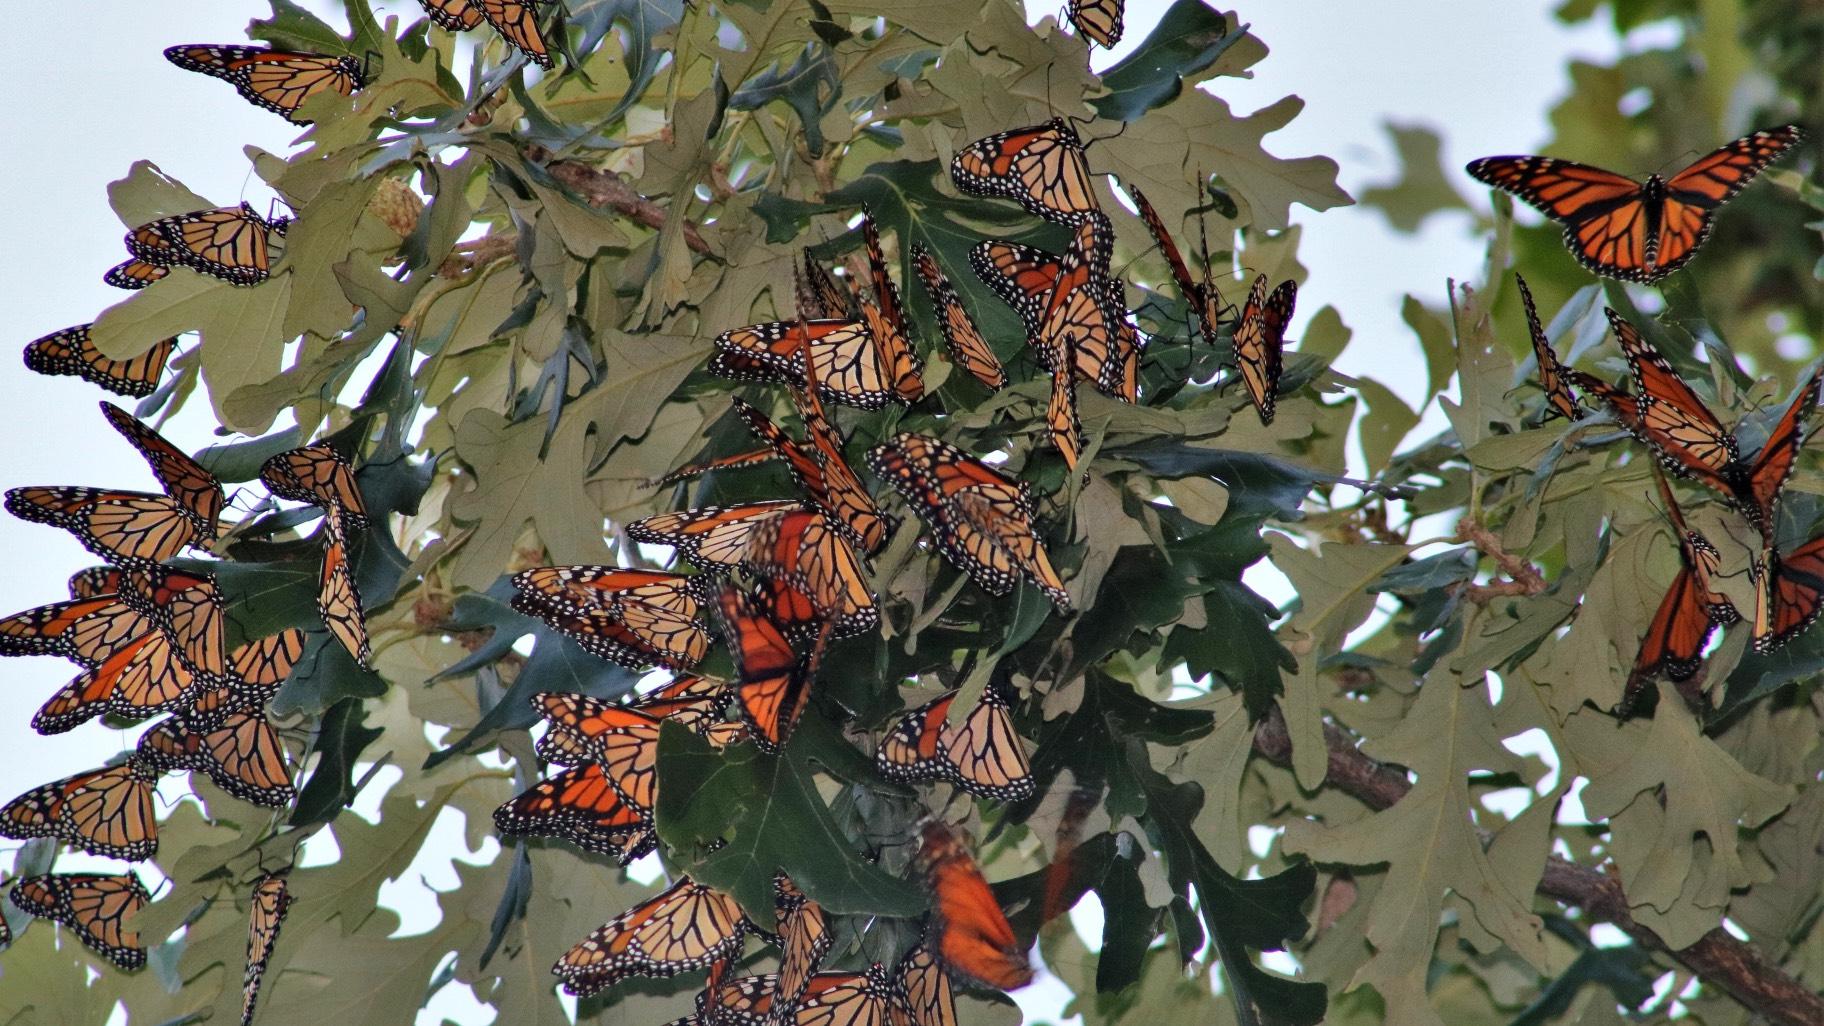 Monarch butterflies roosting in Midewin National Tallgrass Prairie. (Courtesy of Ron Kapala)